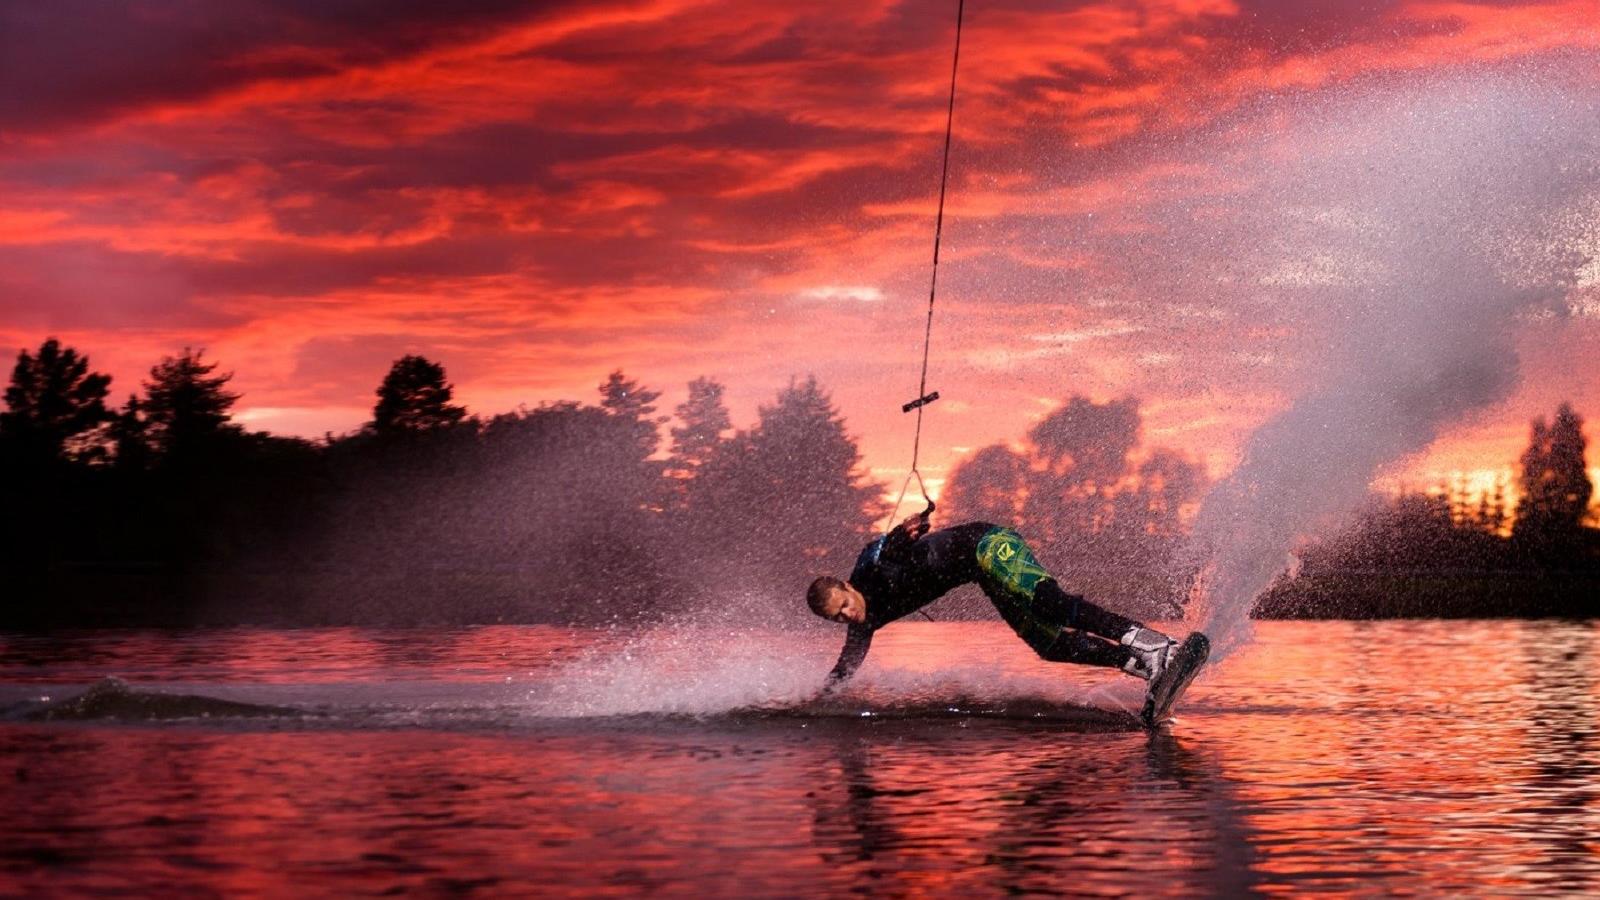 HD Wakeboard Wallpaper Image In Collection